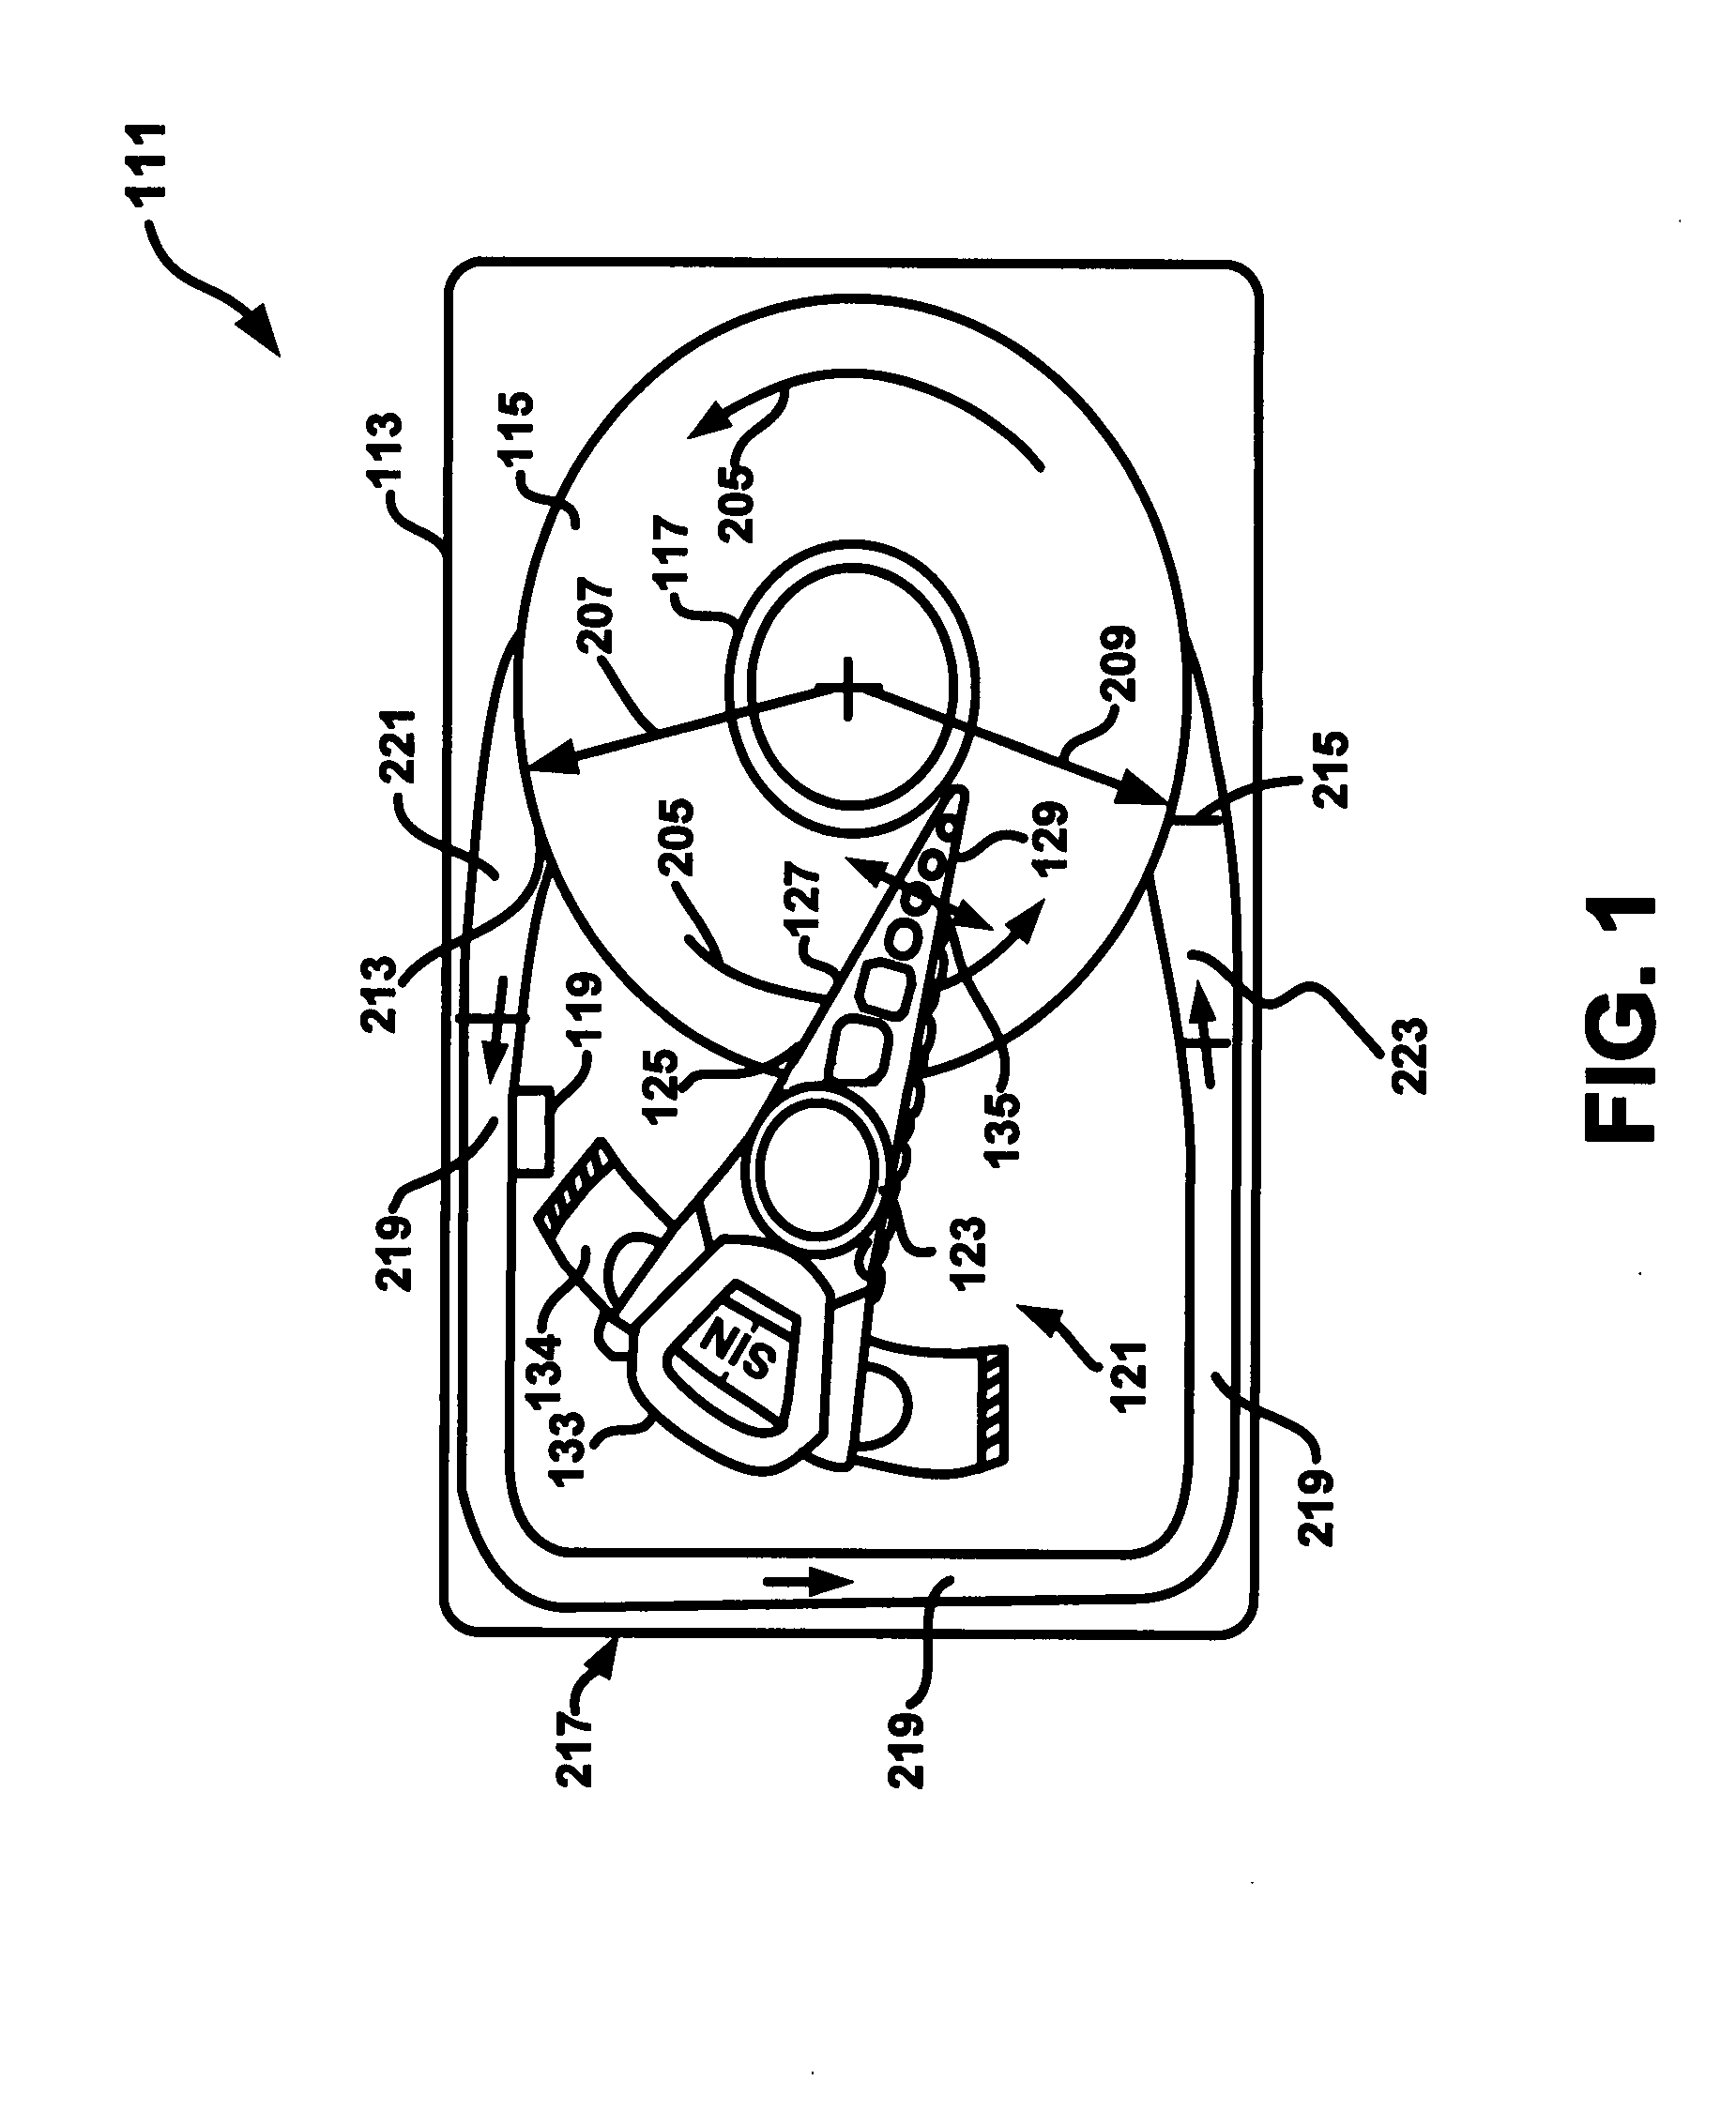 Suspension for a hard disk drive microactuator